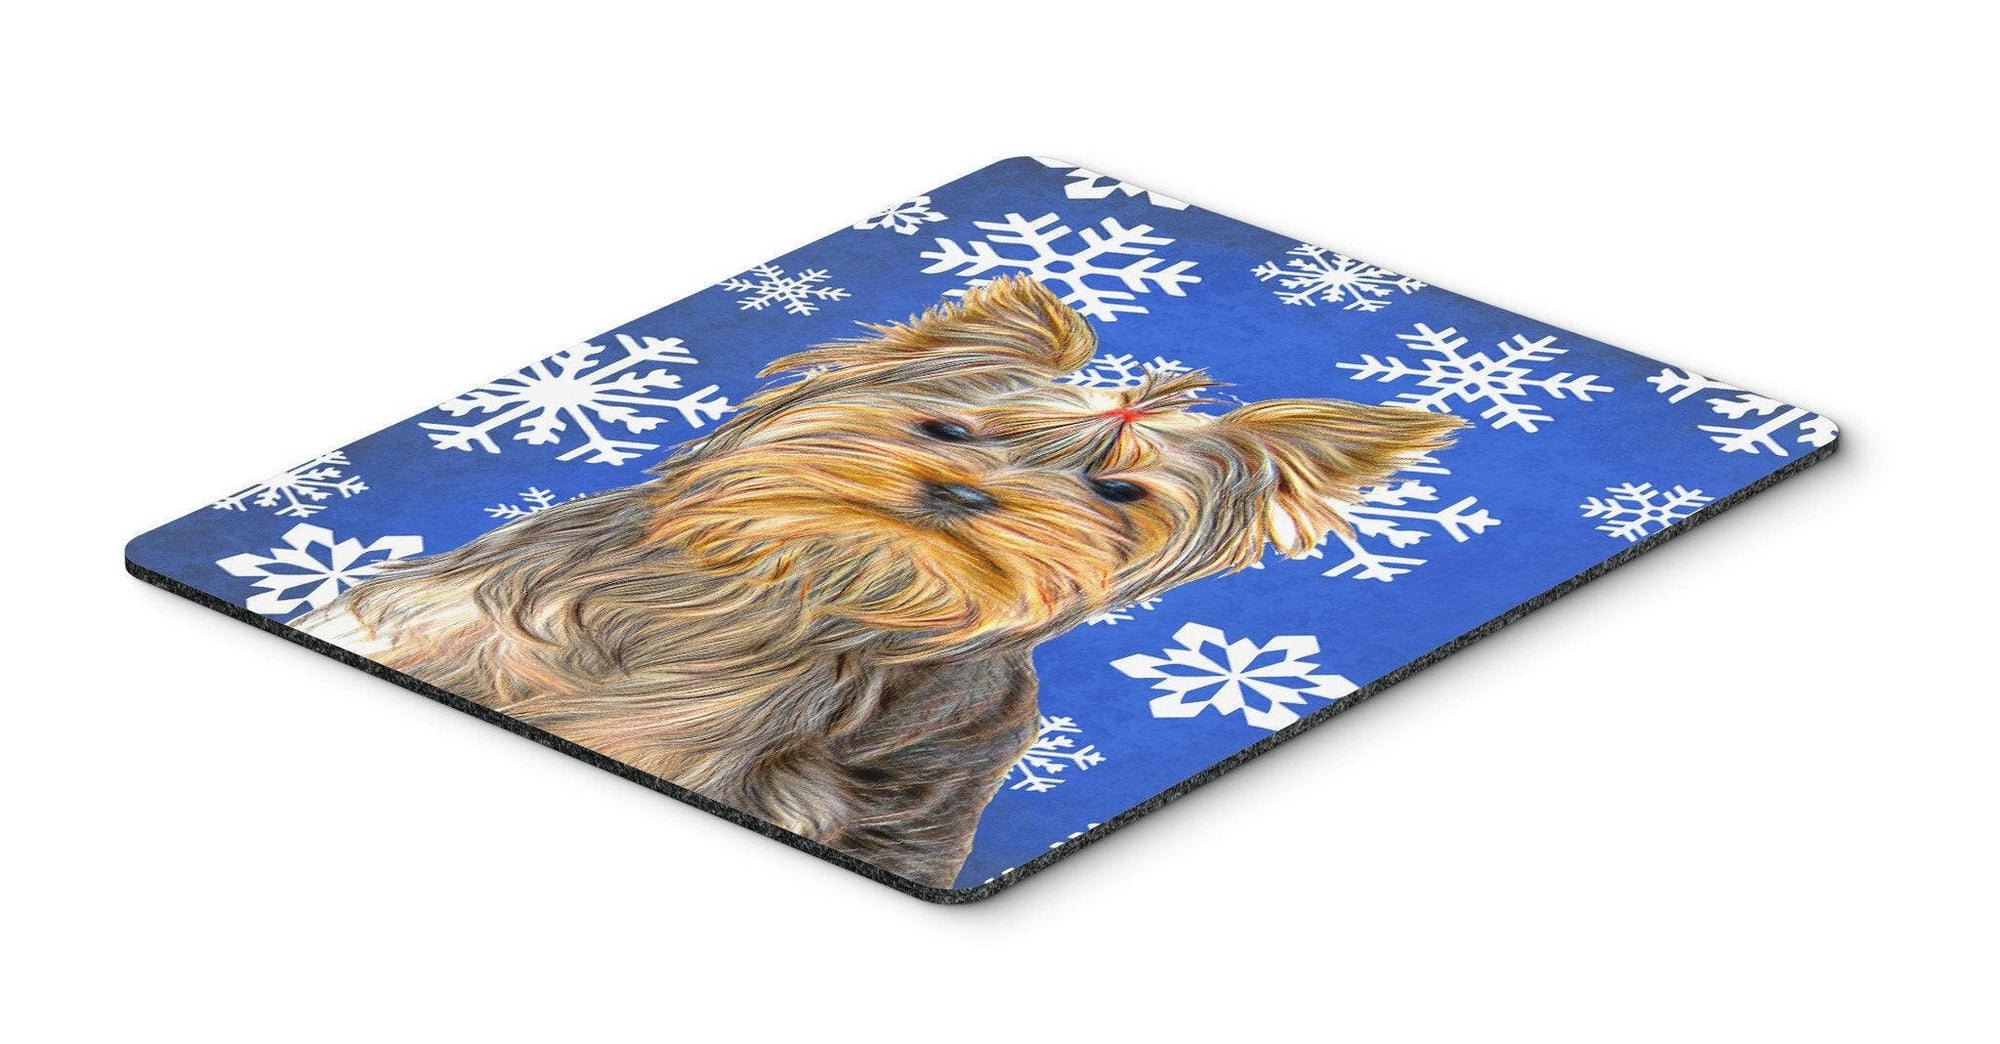 Winter Snowflakes Holiday Yorkie / Yorkshire Terrier Mouse Pad, Hot Pad or Trivet KJ1177MP by Caroline's Treasures